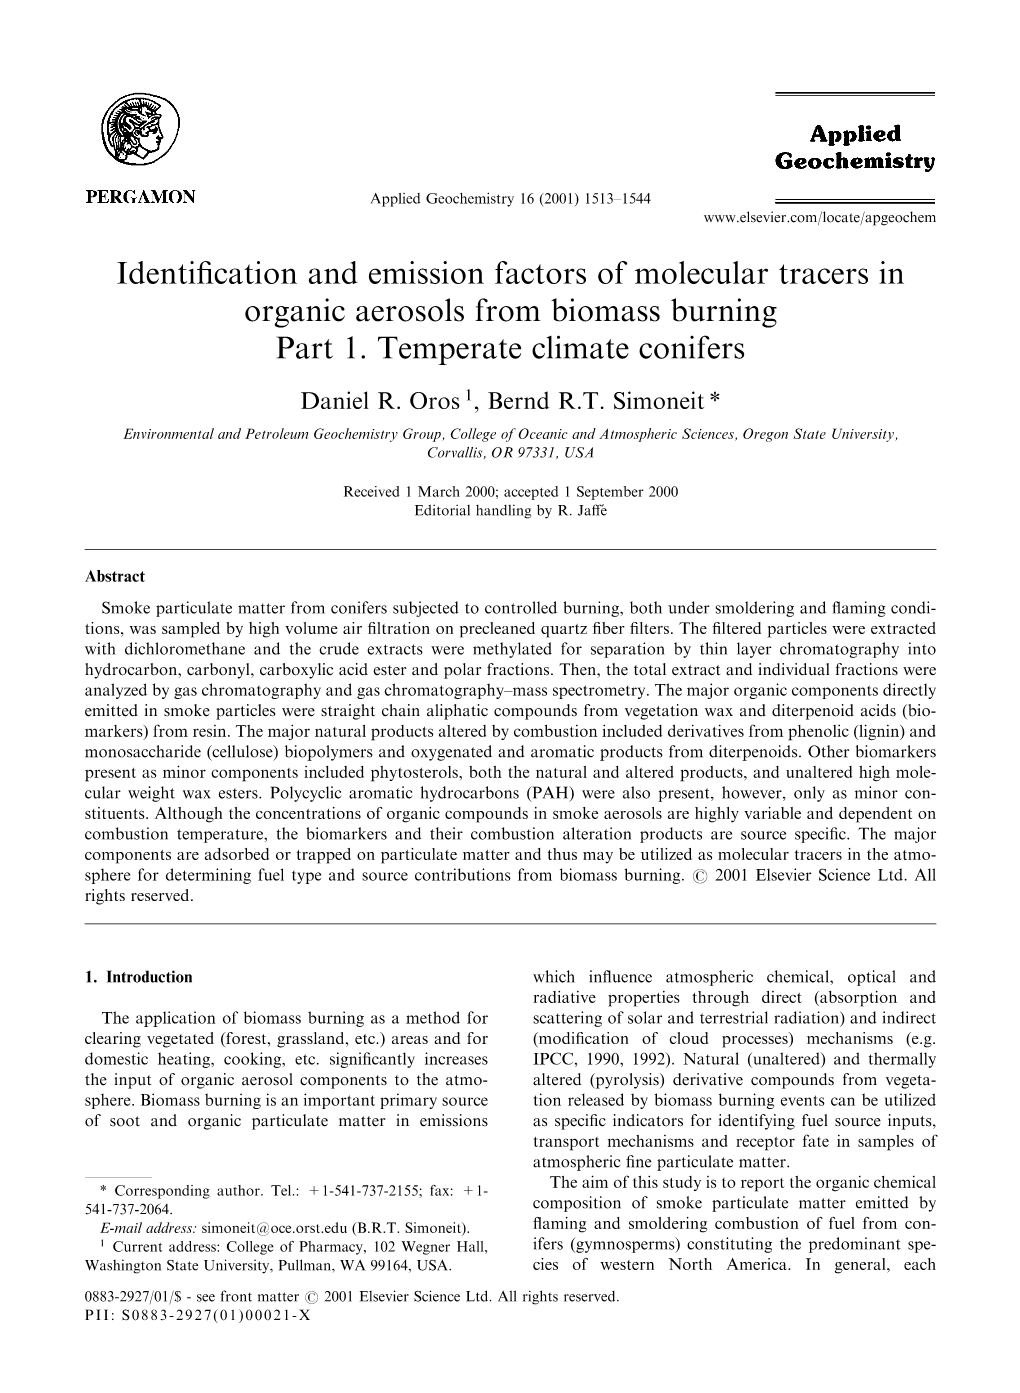 Identification and Emission Factors of Molecular Tracers in Organic